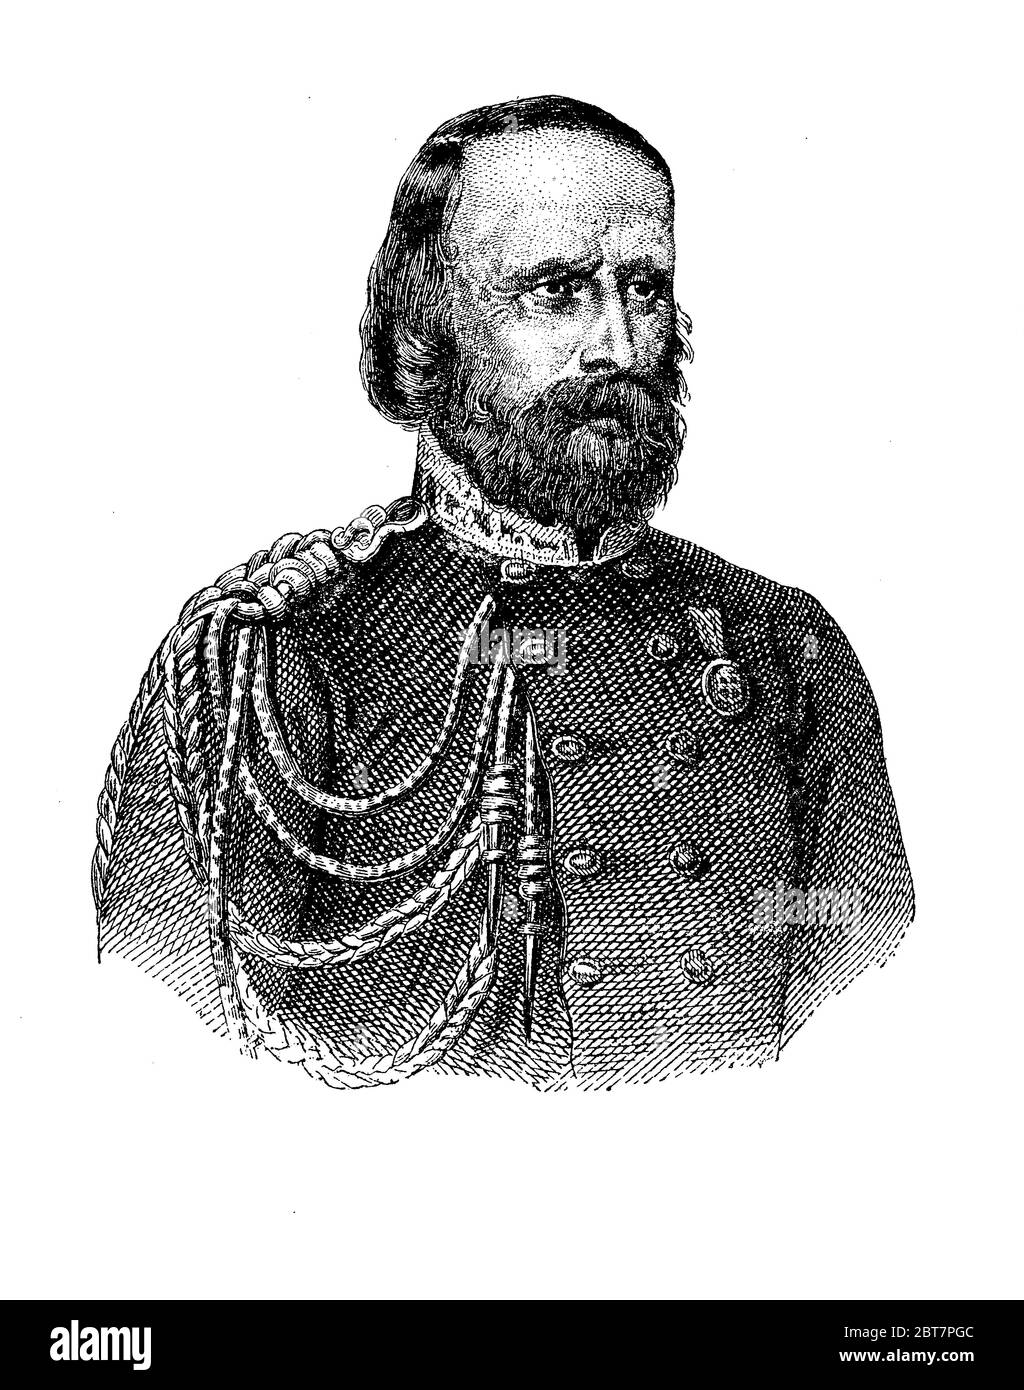 Engraving portrait of Giuseppe Garibaldi (1807 - 1882)  Italian general and republican, named the Hero of the Two Worlds for his military enterprises in South America and Italy, where contributed to the unification of the country Stock Photo